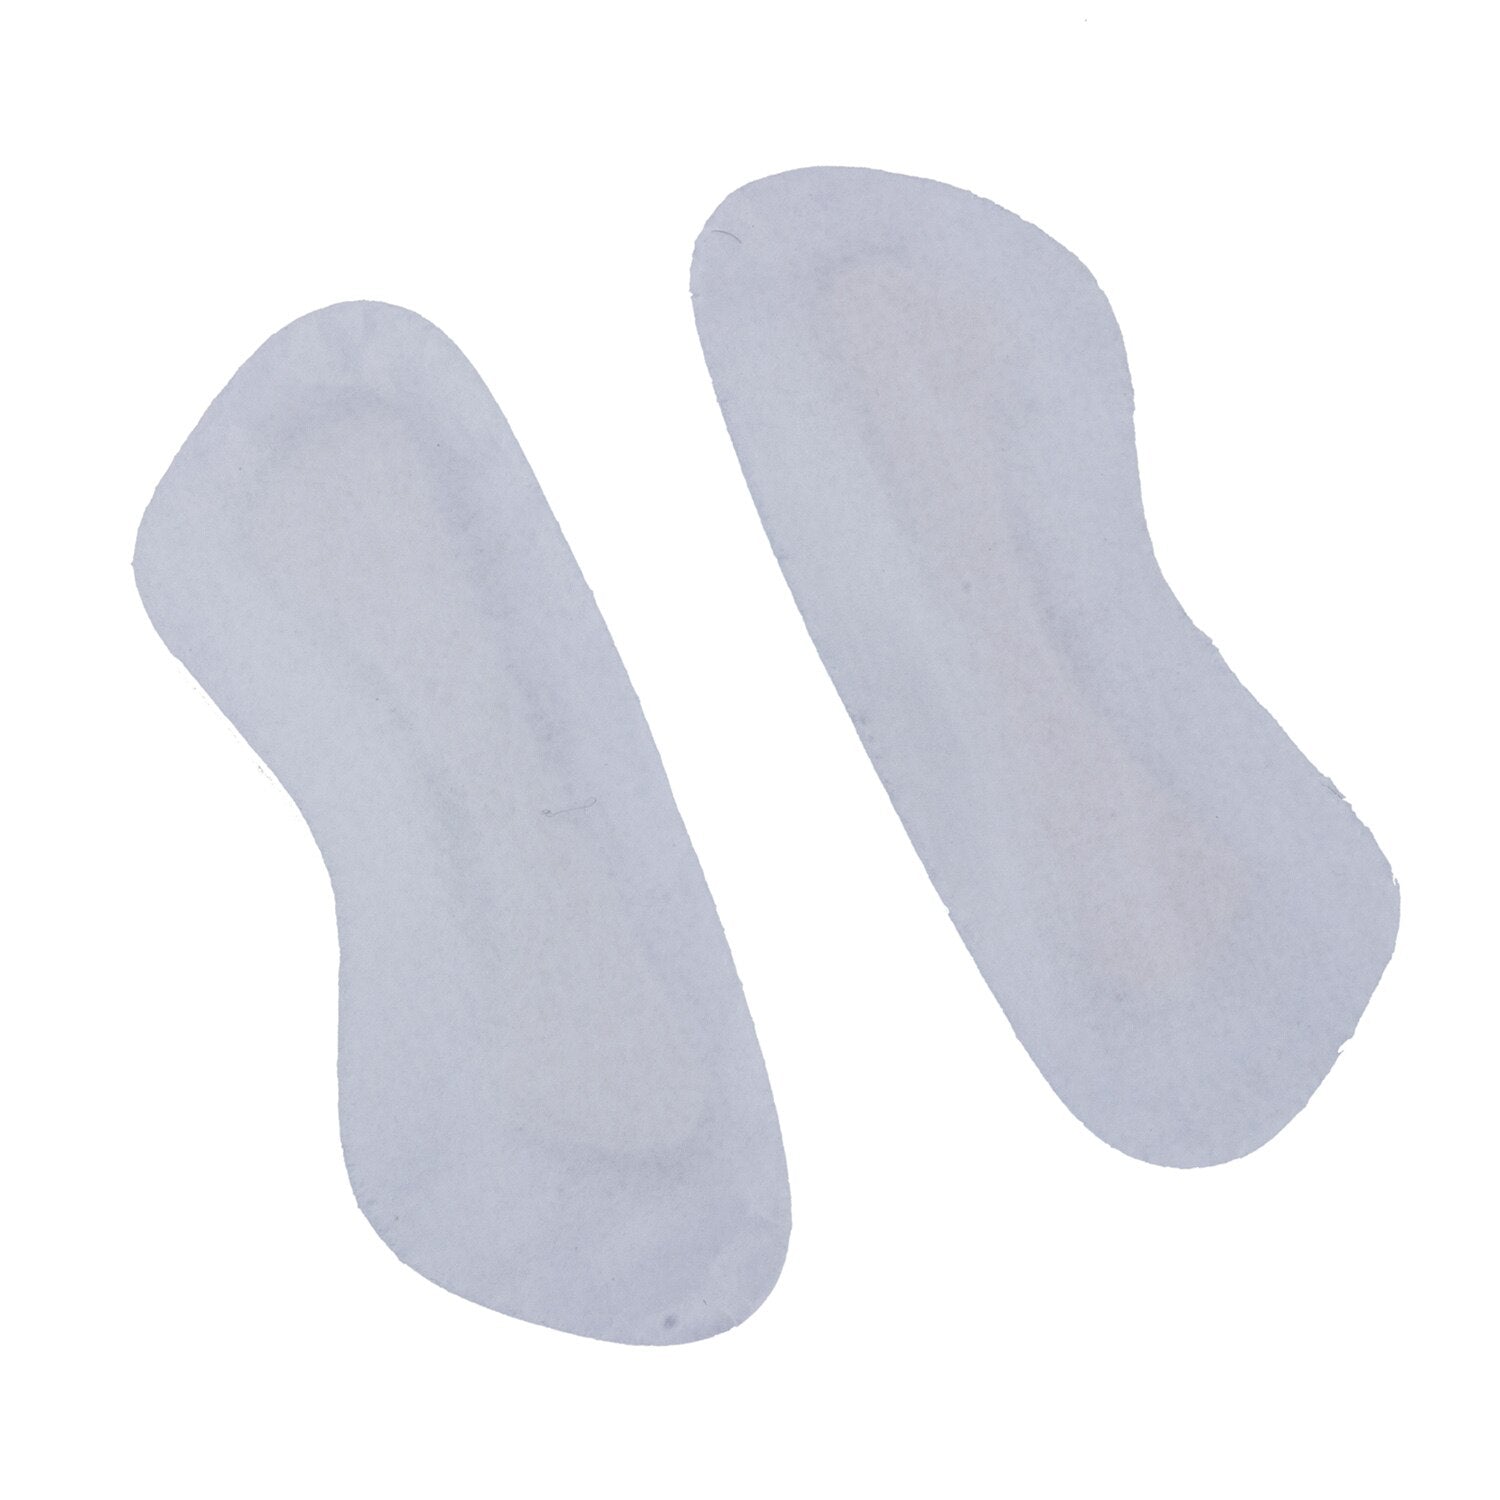 1 Pair Inserts Insoles Pads Cushion Liner Protector Foot Care For Women Inserts Sticky Shoe Back Heel - ebowsos